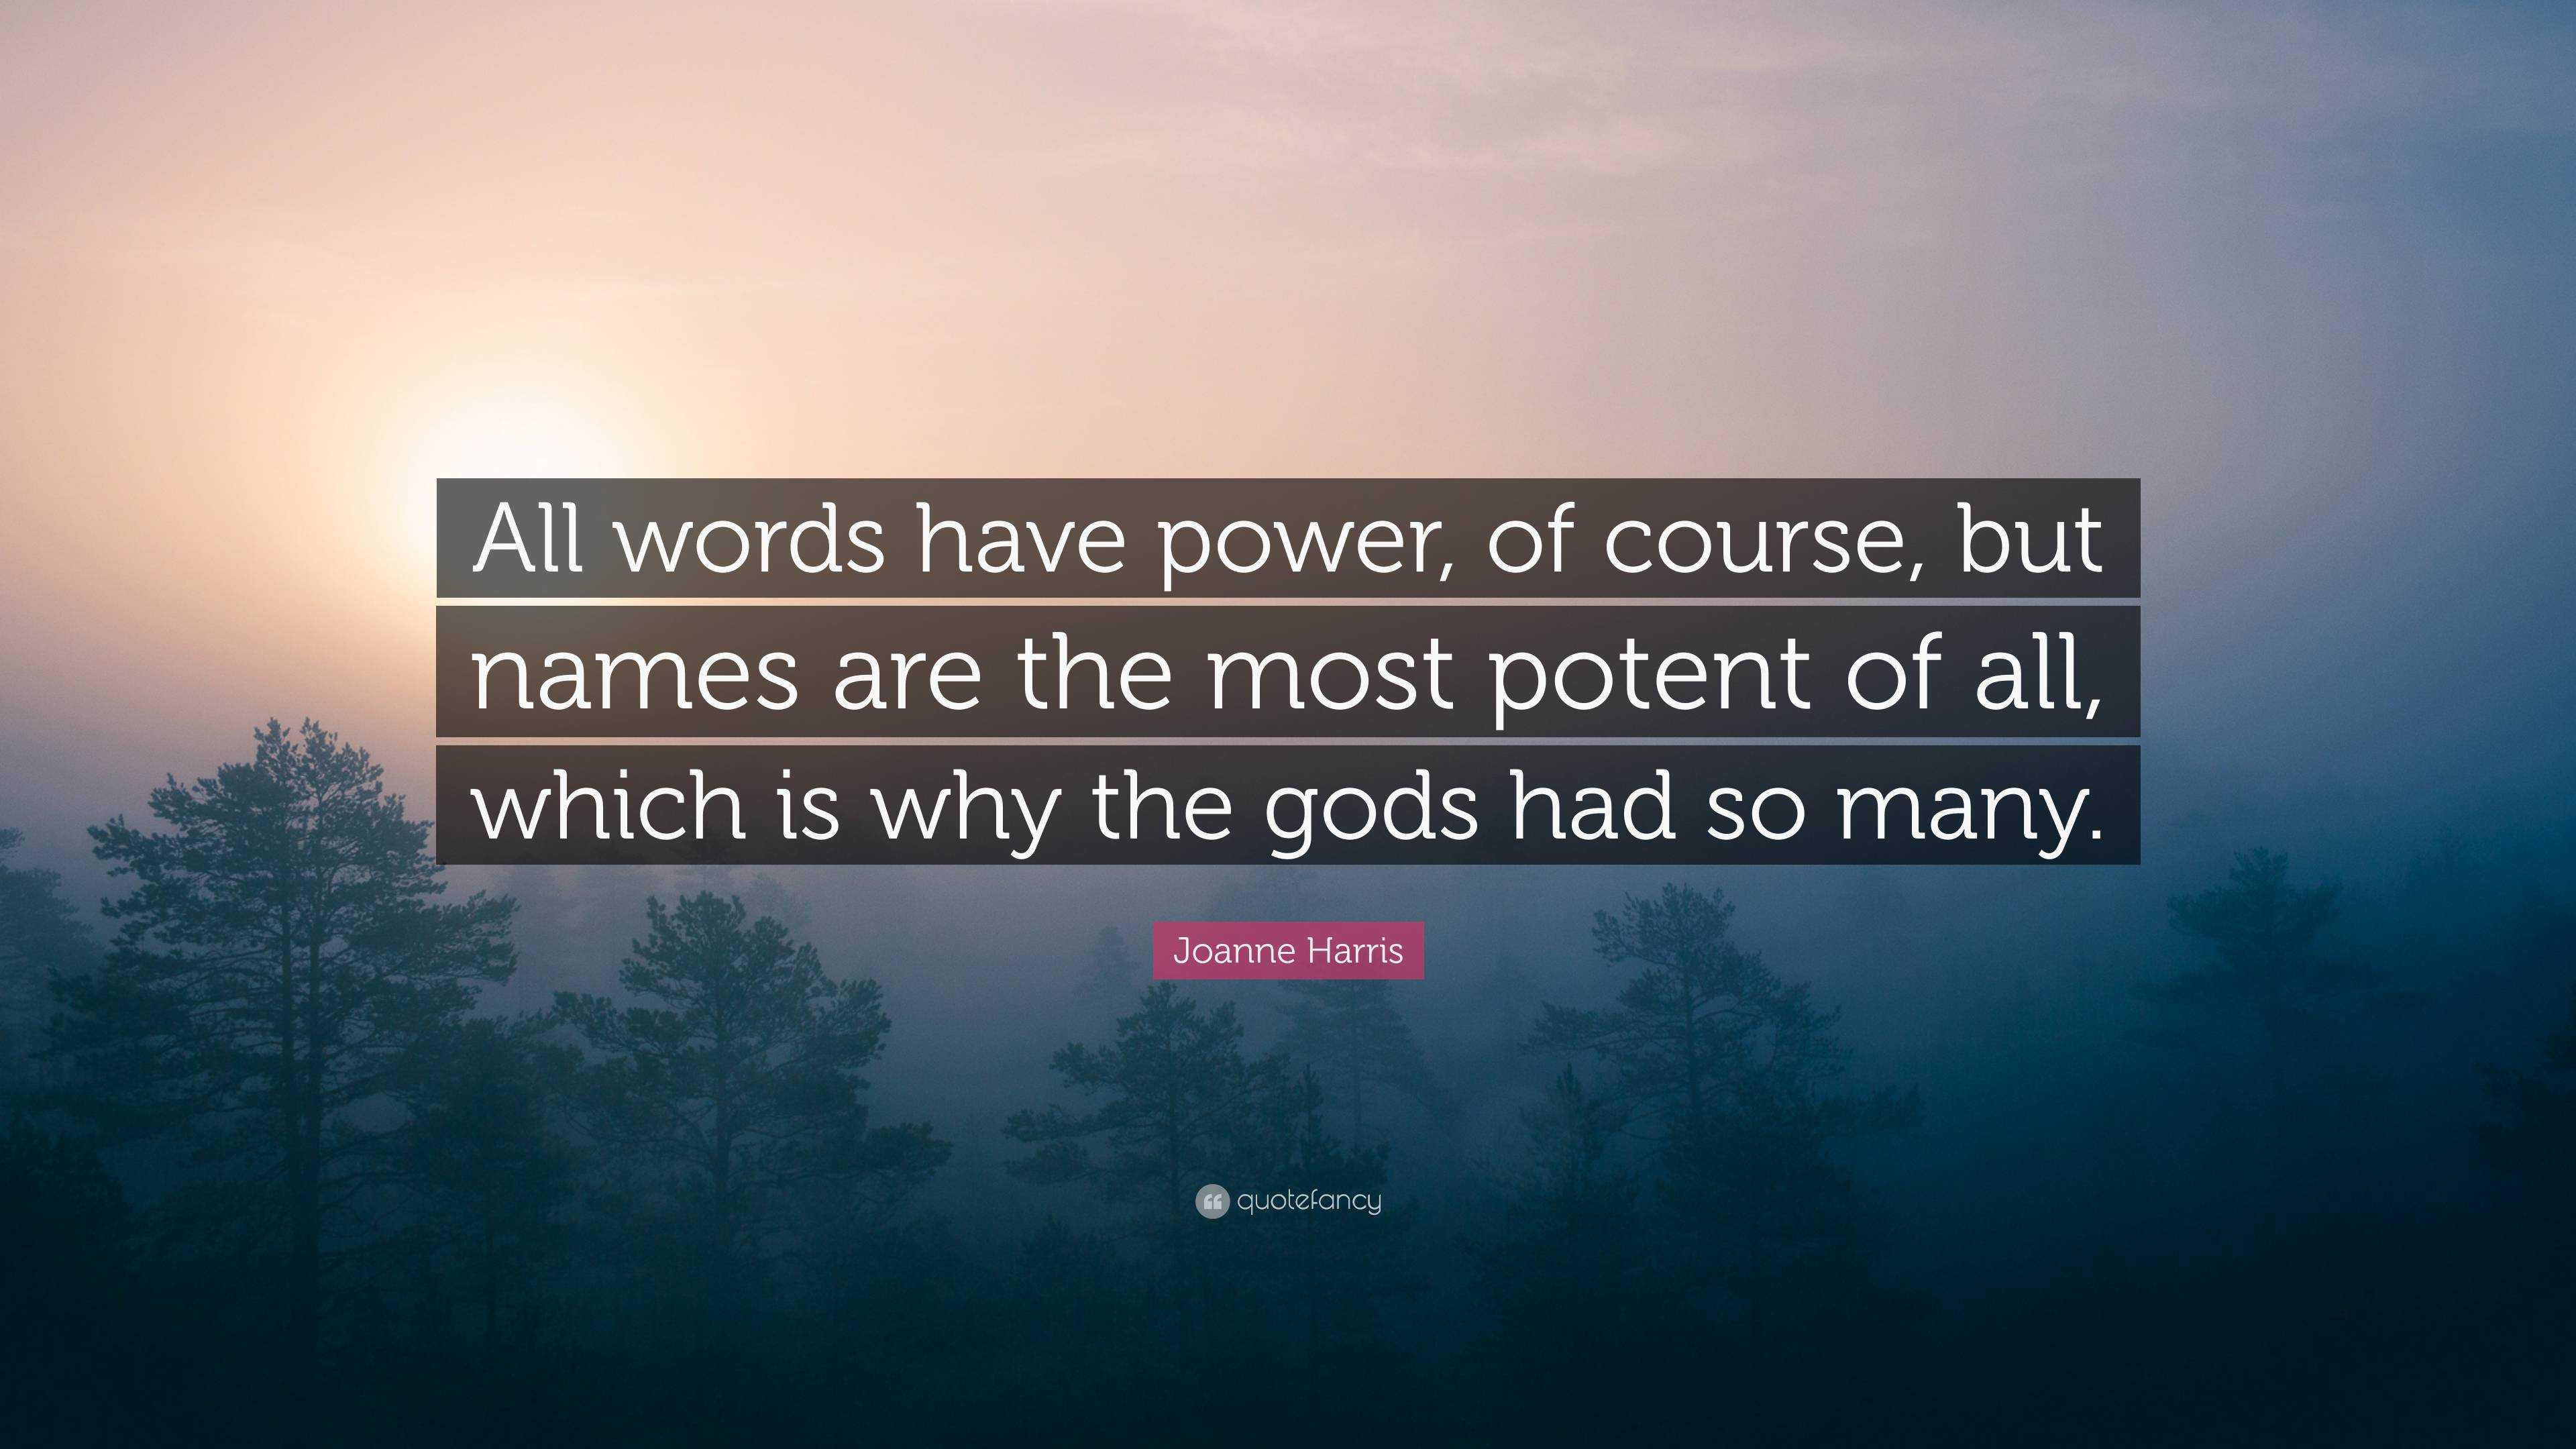 Joanne Harris Quote: “All words have power, of course, but names are ...